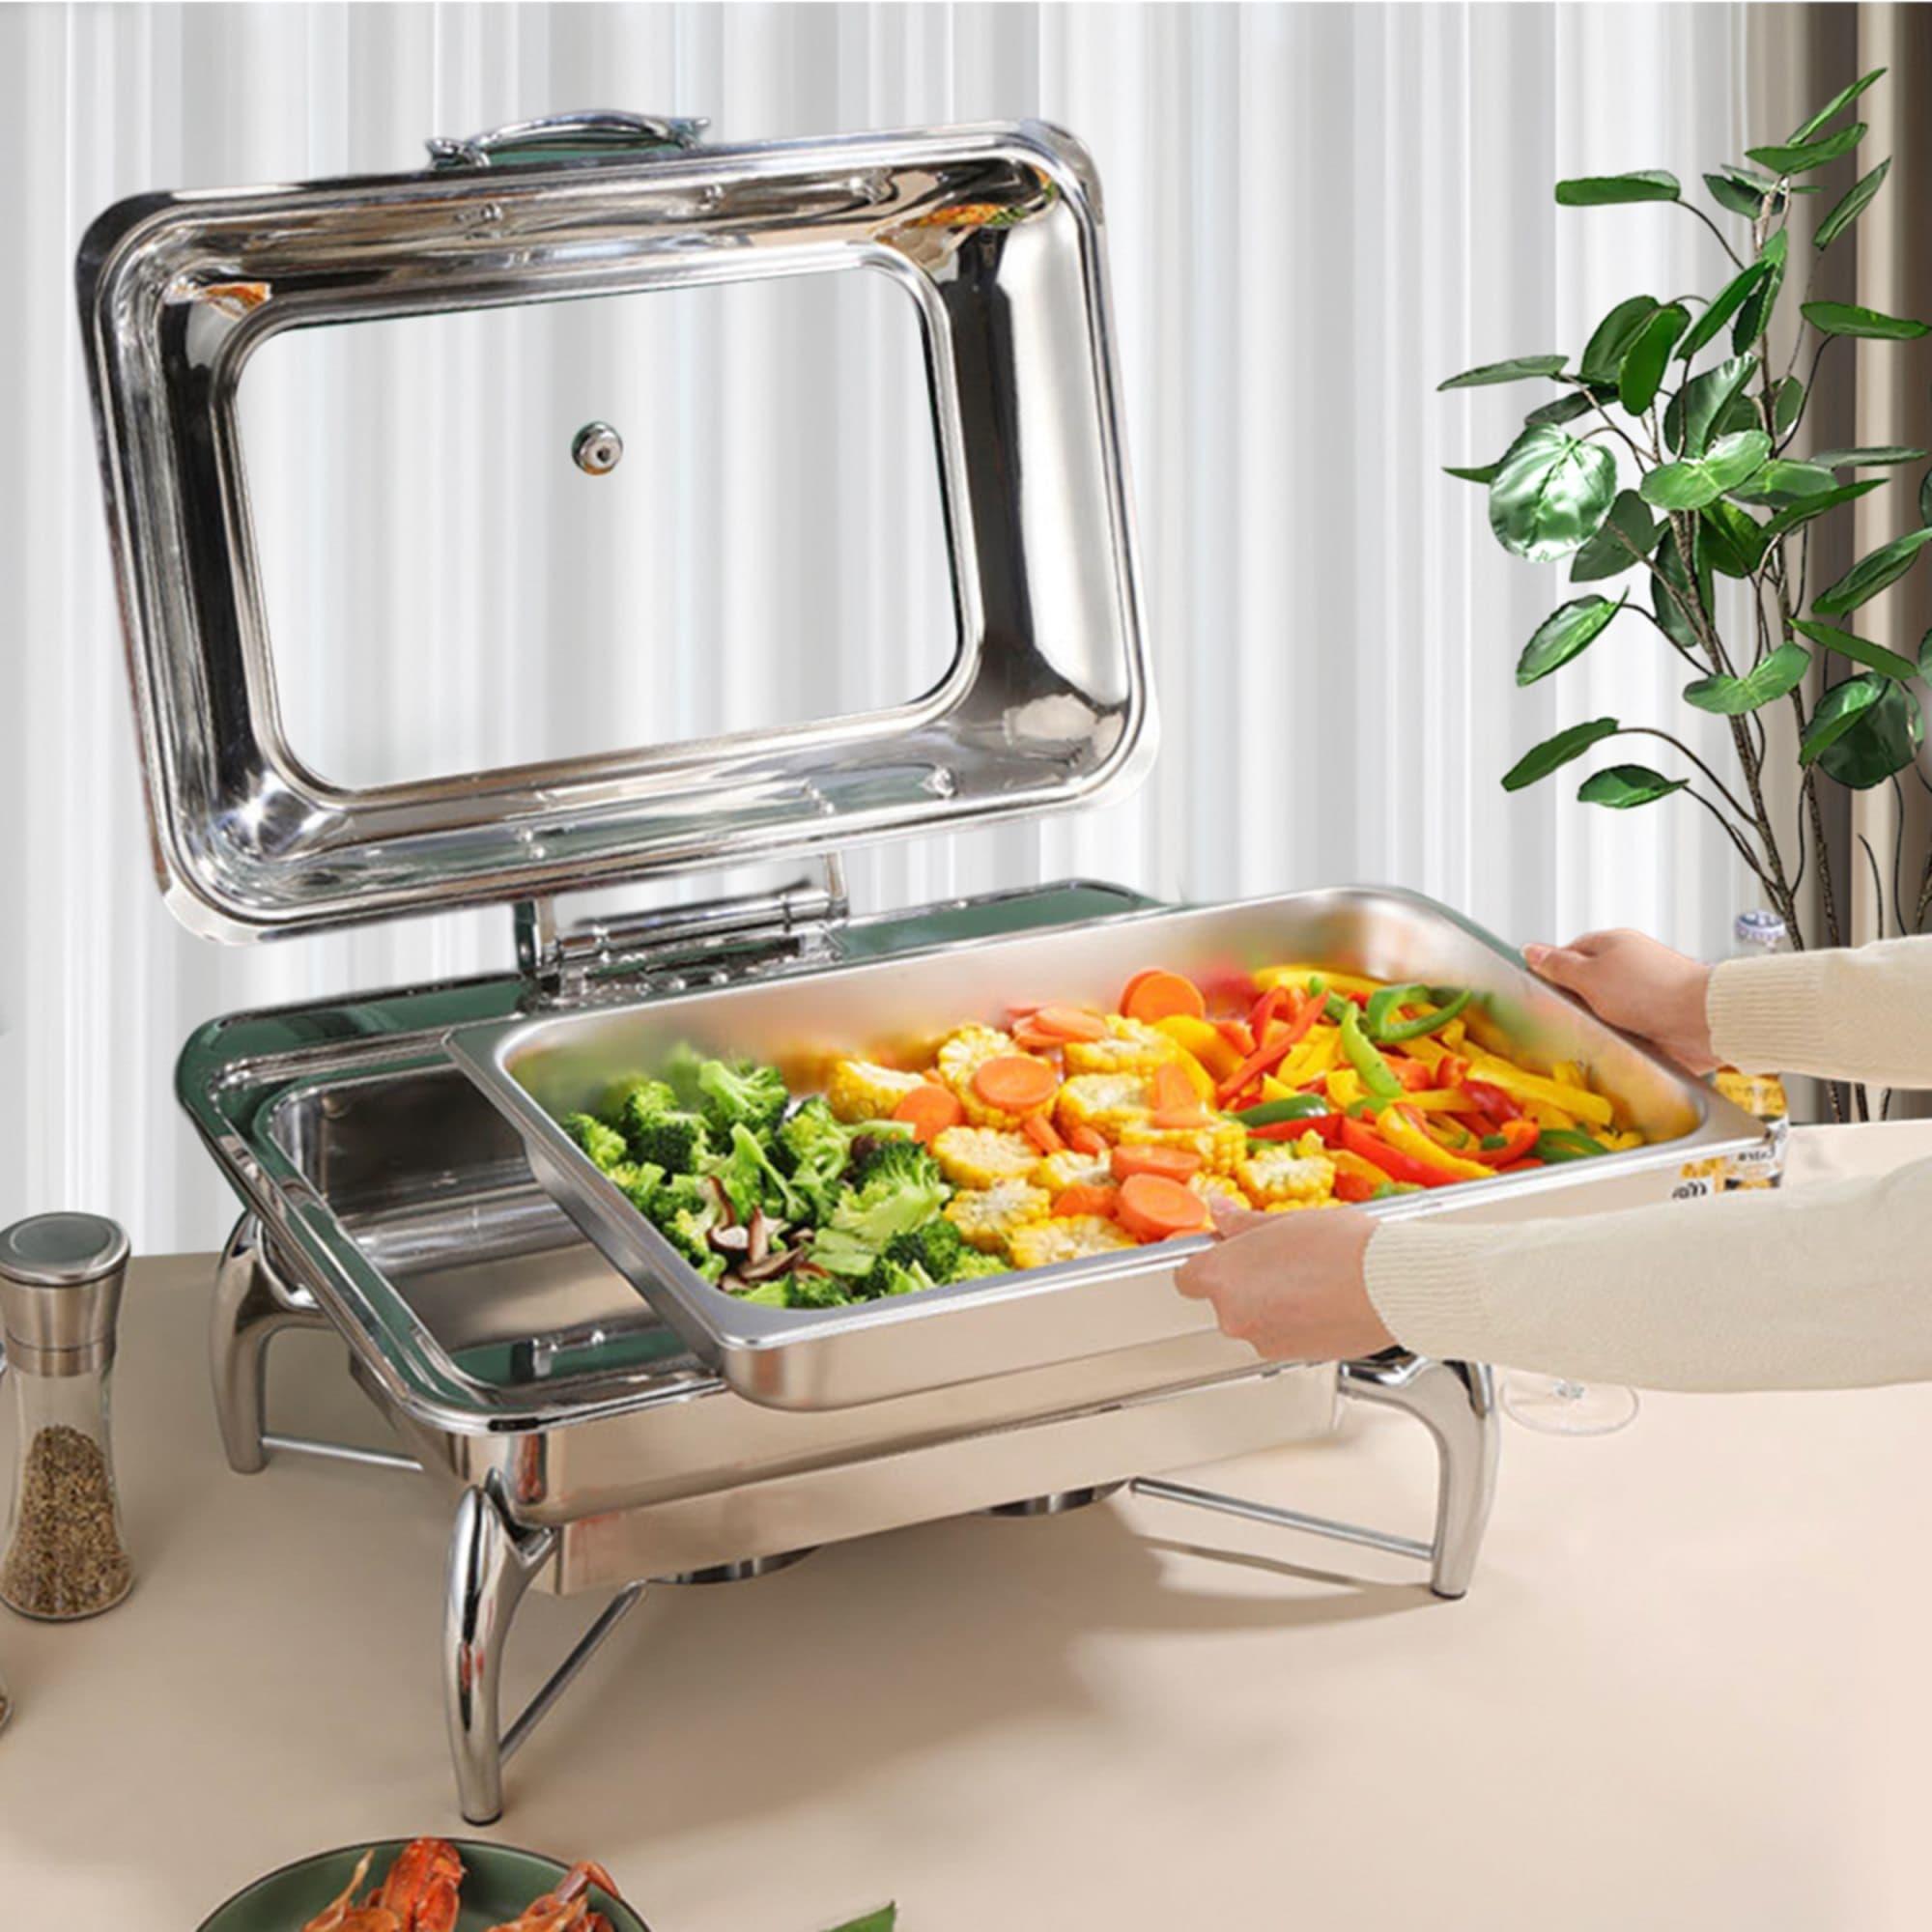 Soga Rectangular Stainless Steel Chafing Dish with Top Lid Image 5